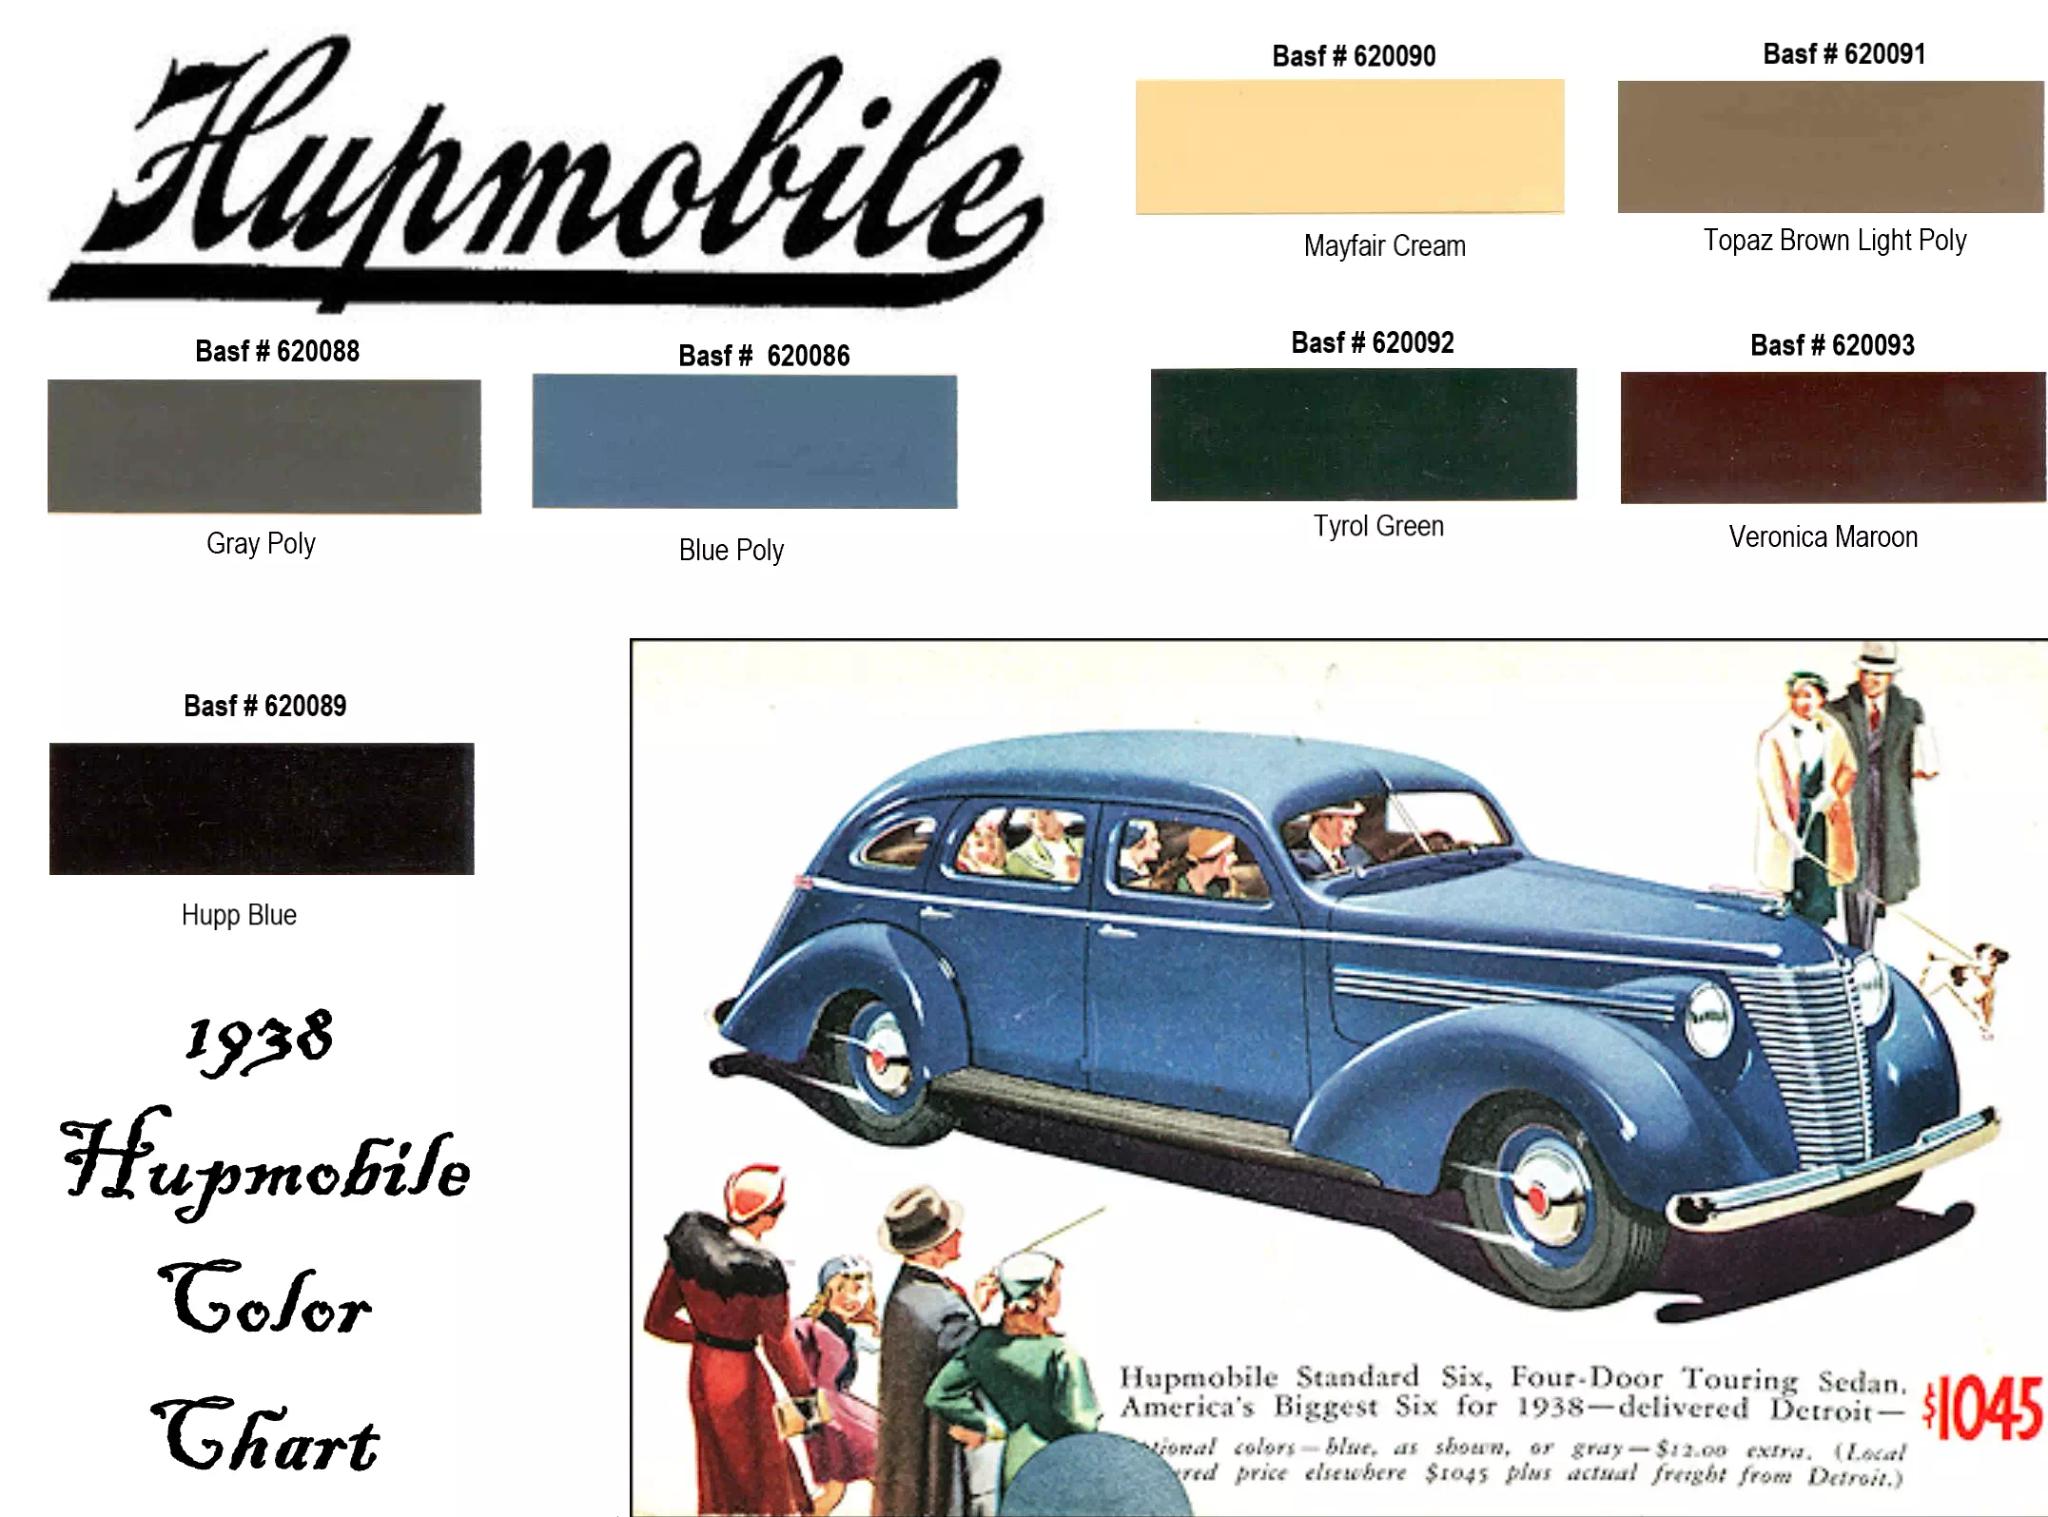 Colors and codes used on Hupmobile in 1938